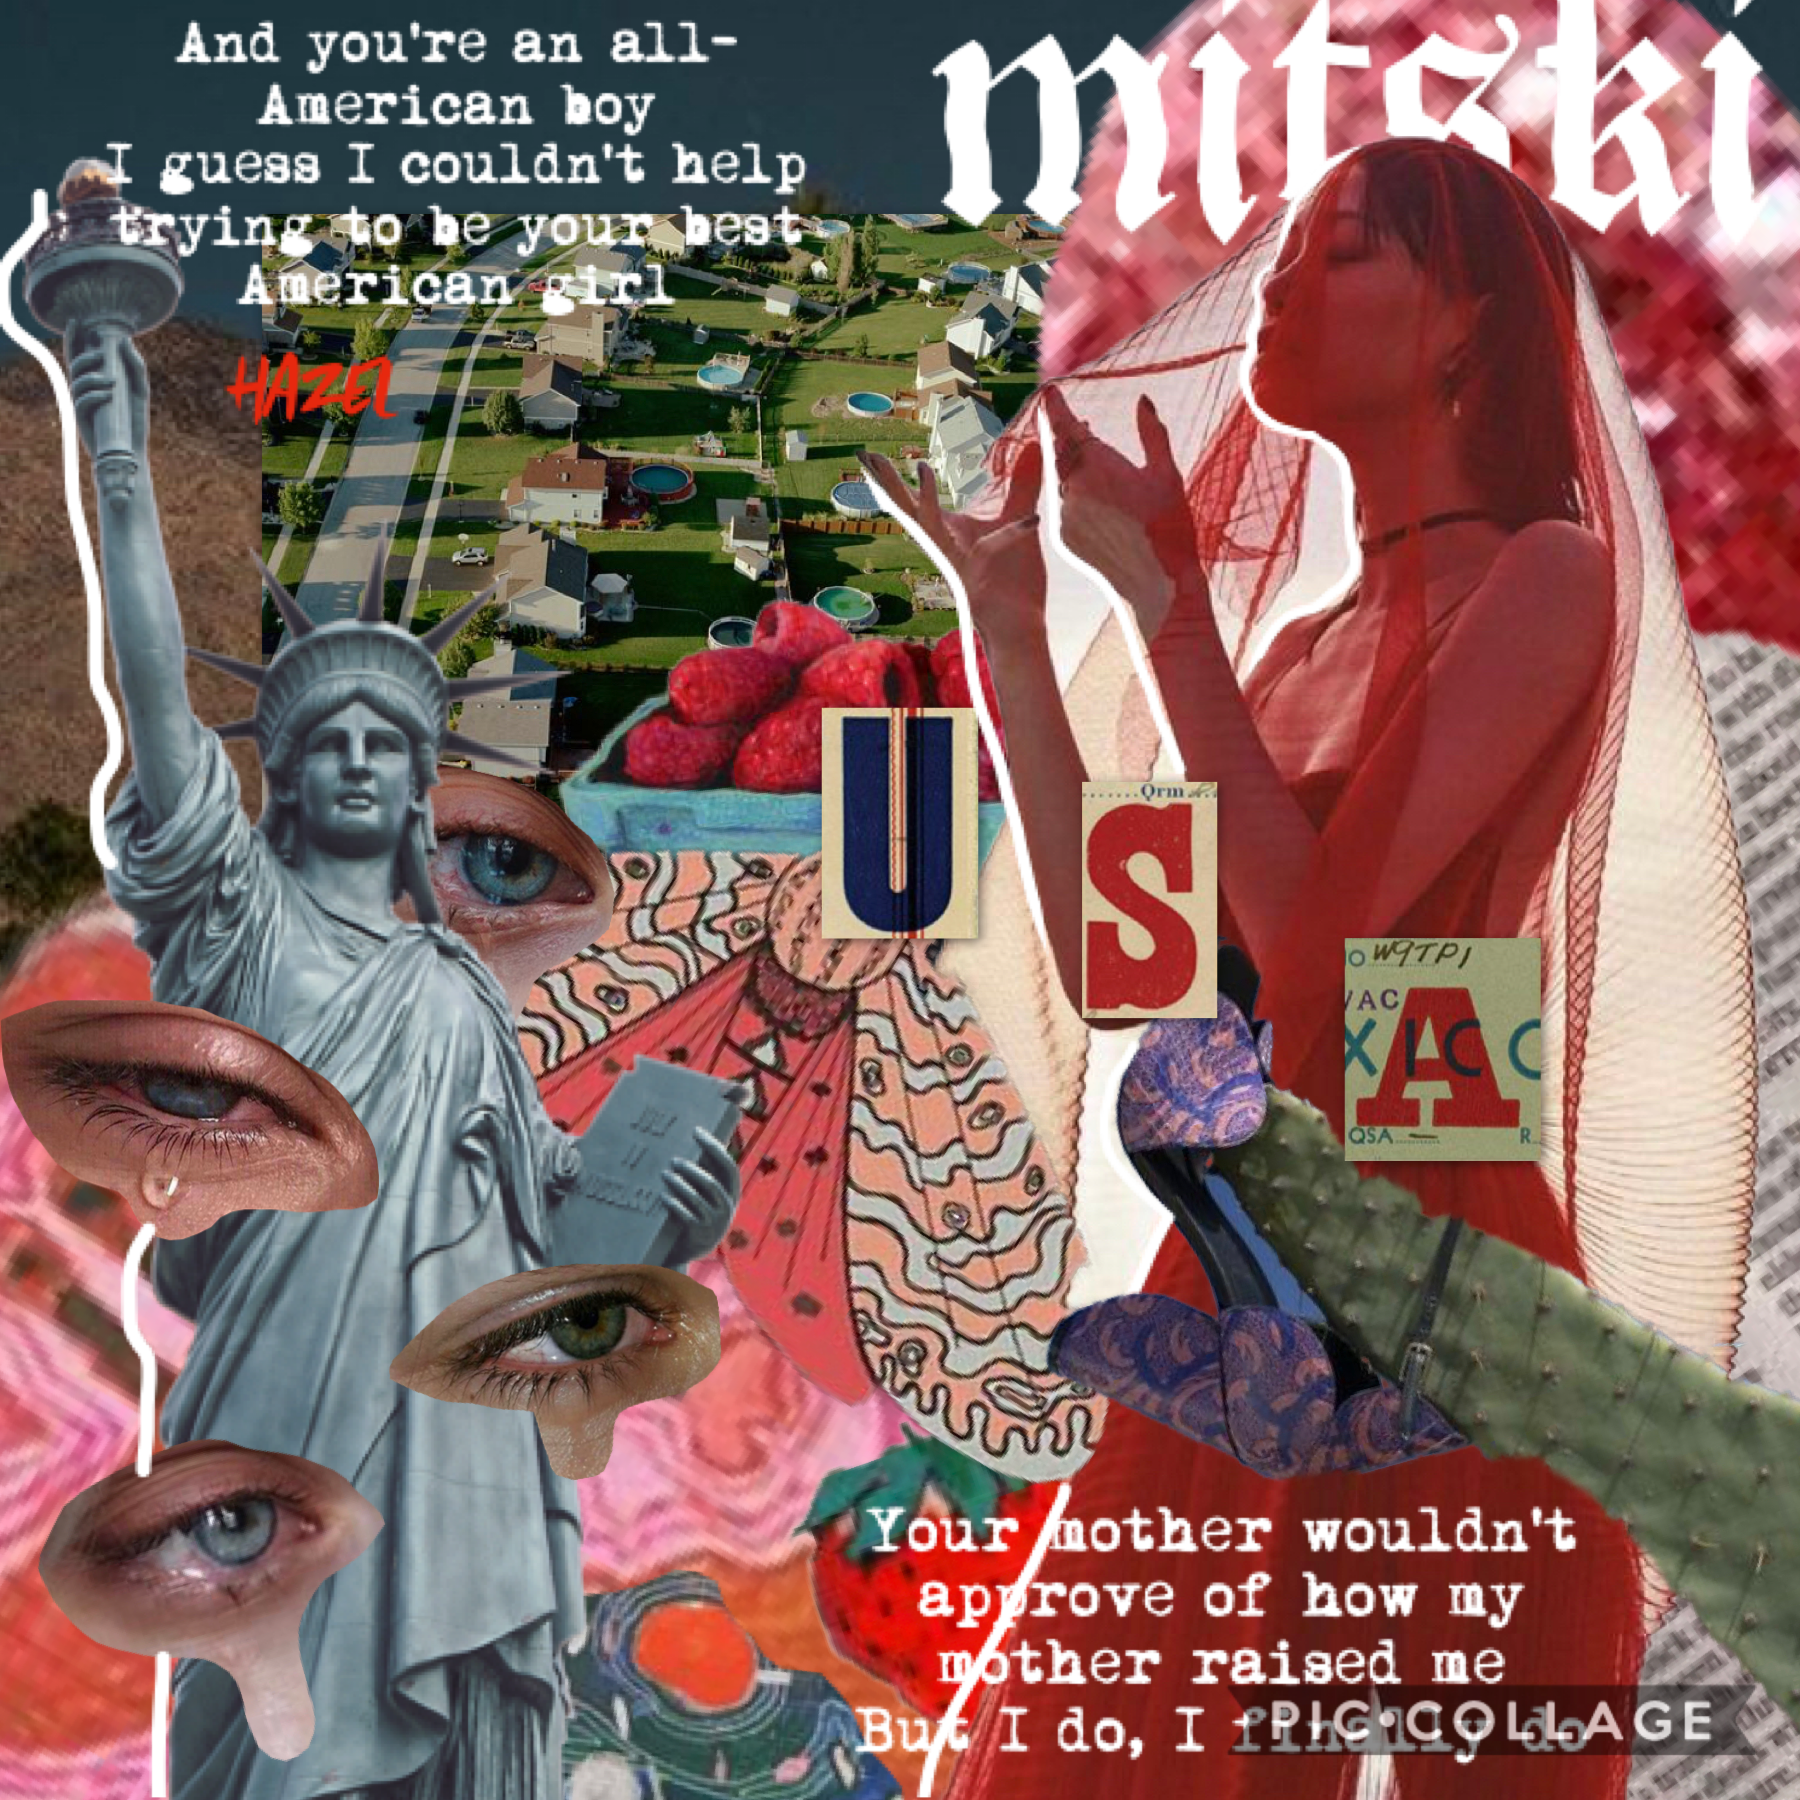 YOUR BEST AMERICAN GIRL - MITSKI ❣️ I think I have too much time on my hands agaha. Making collages is kind of addicting though. I hope whoever is seeing this is having a nice day :) 